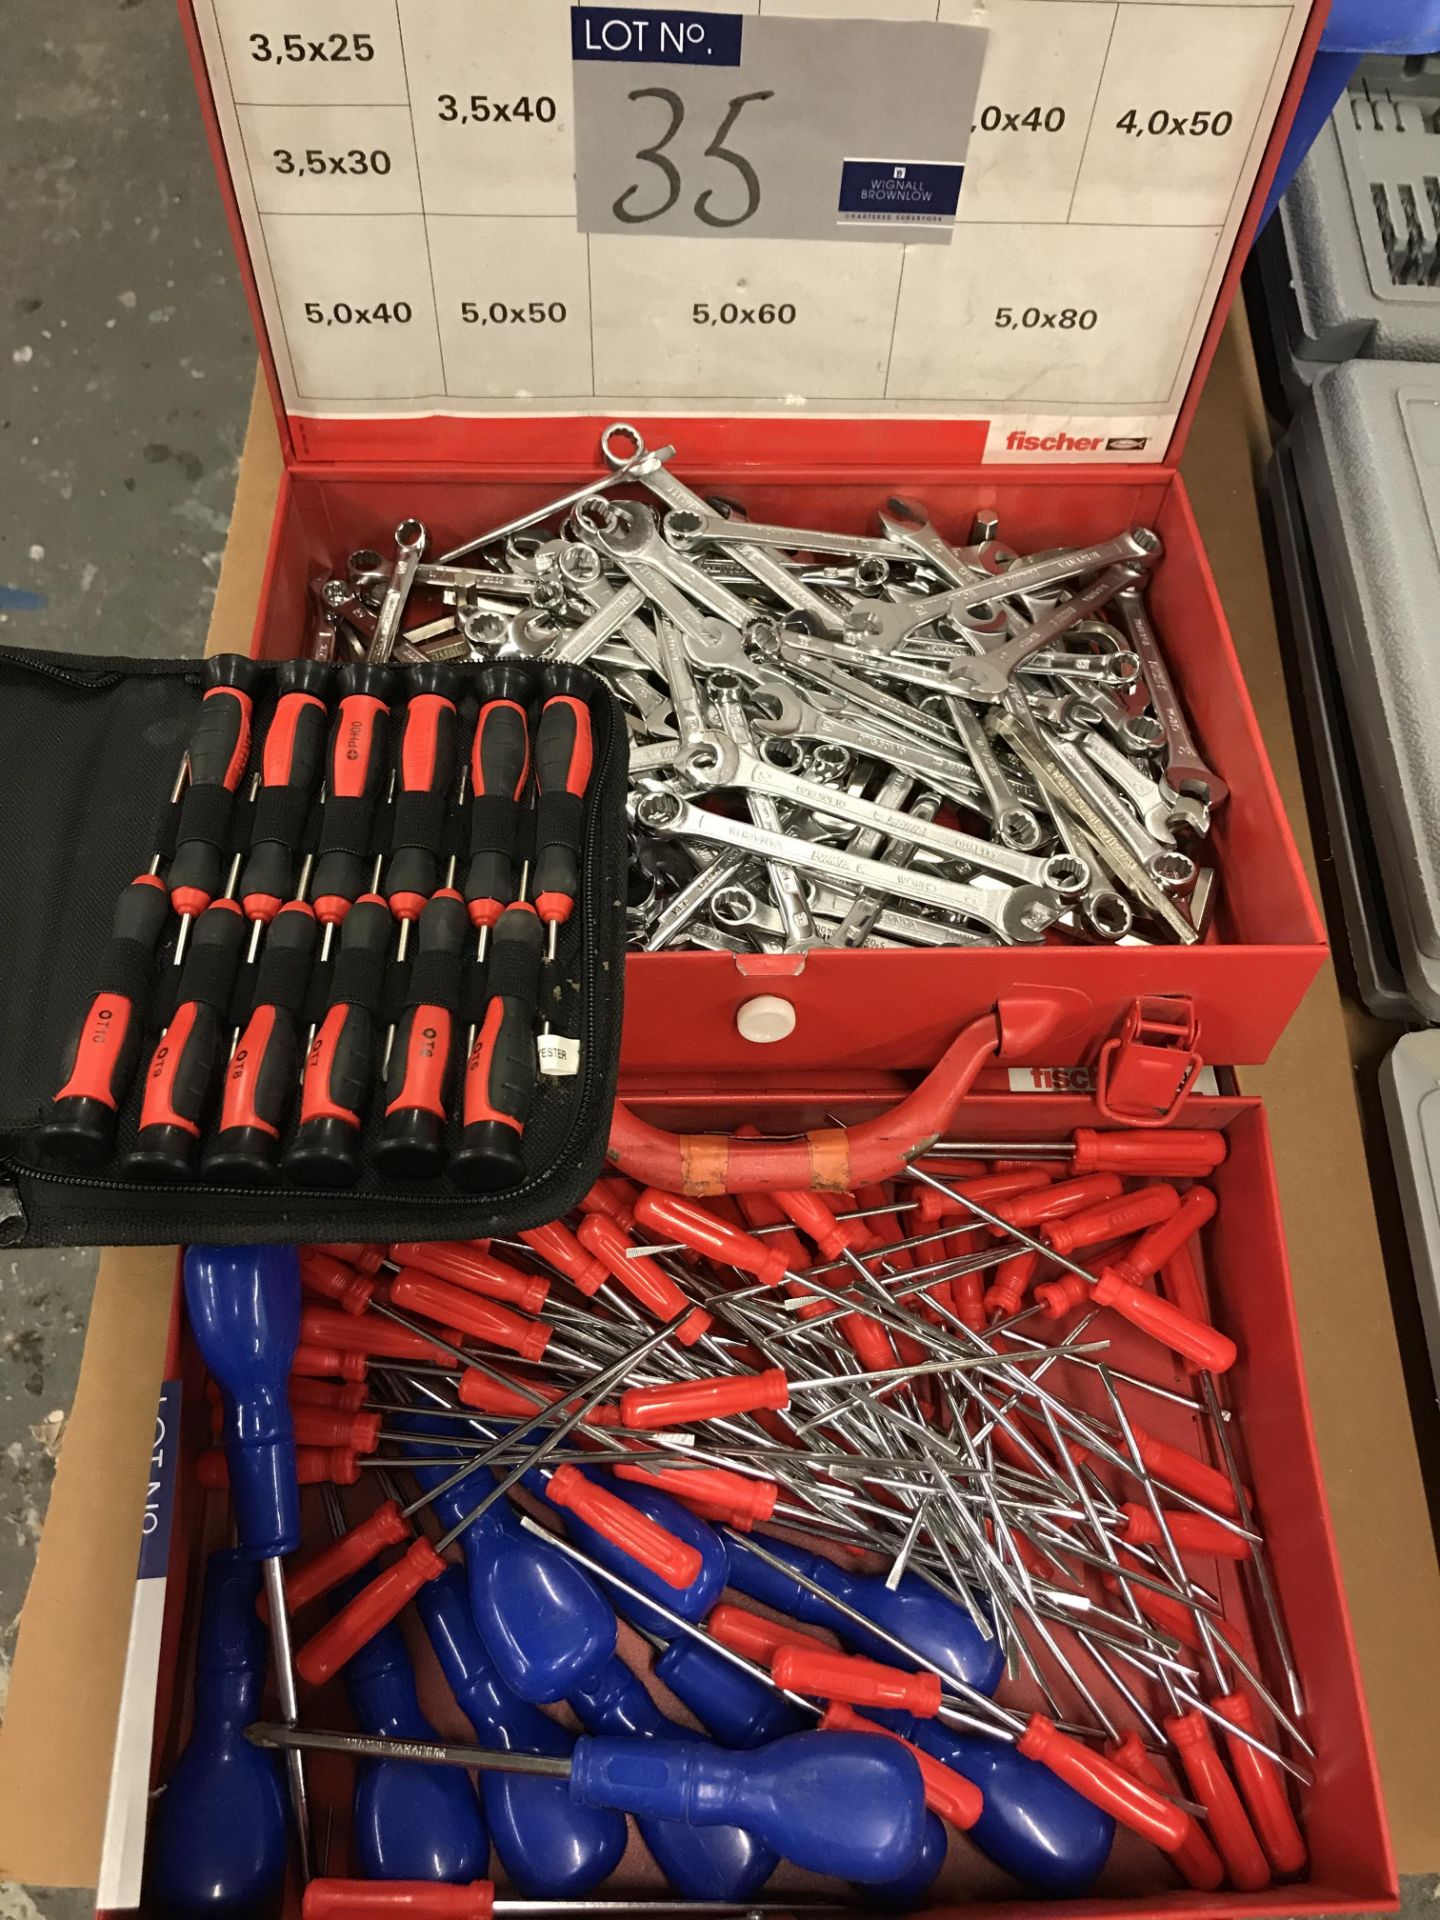 A Quantity of Screwdrivers and Open Ended Spanners in two boxes.